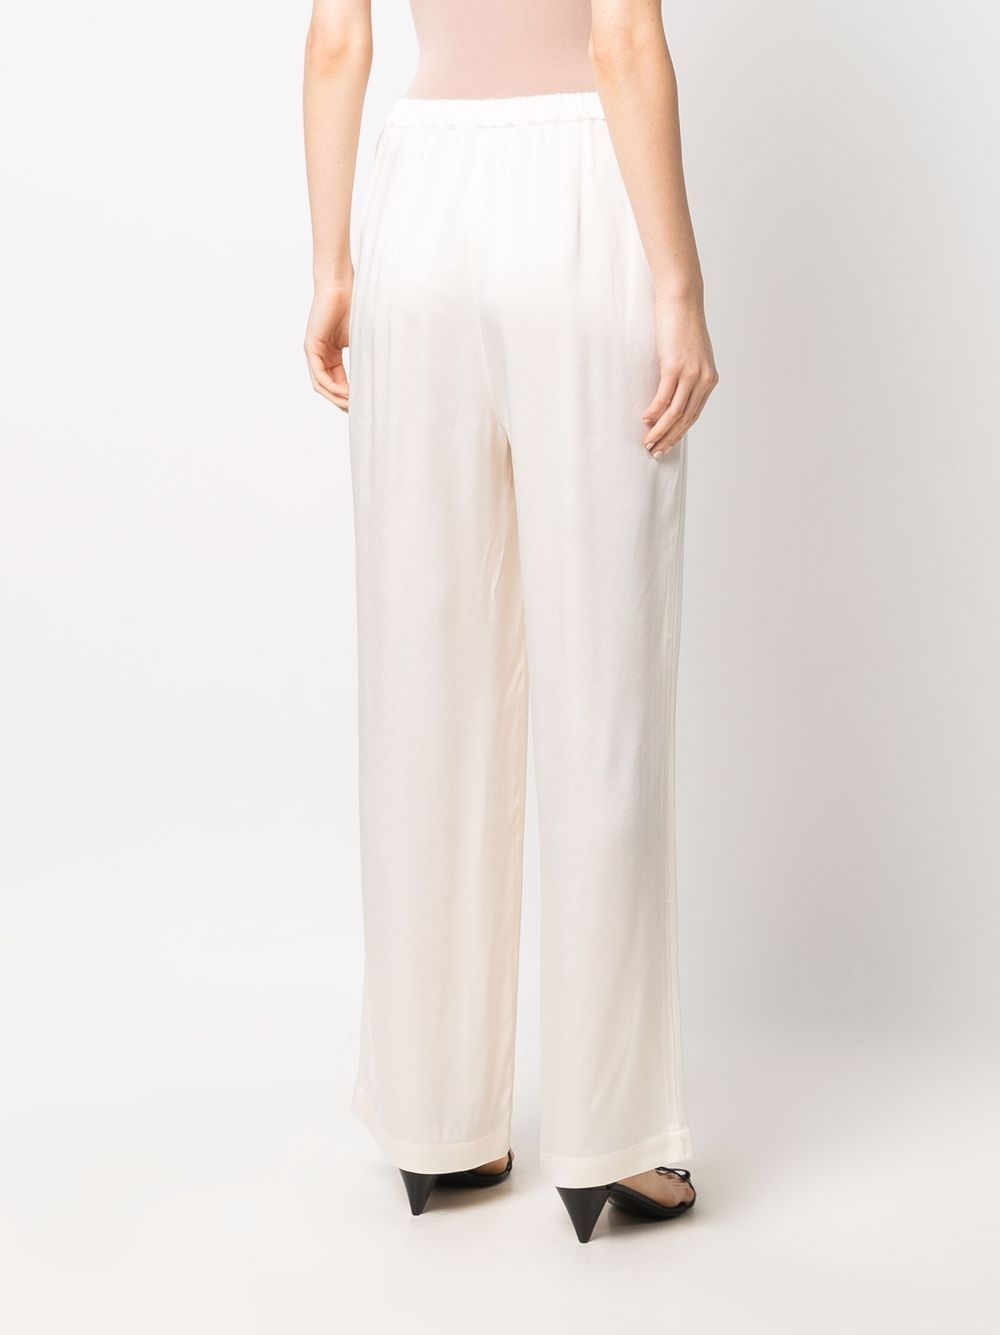 Shop 12 STOREEZ wide-leg trousers with Express Delivery - FARFETCH